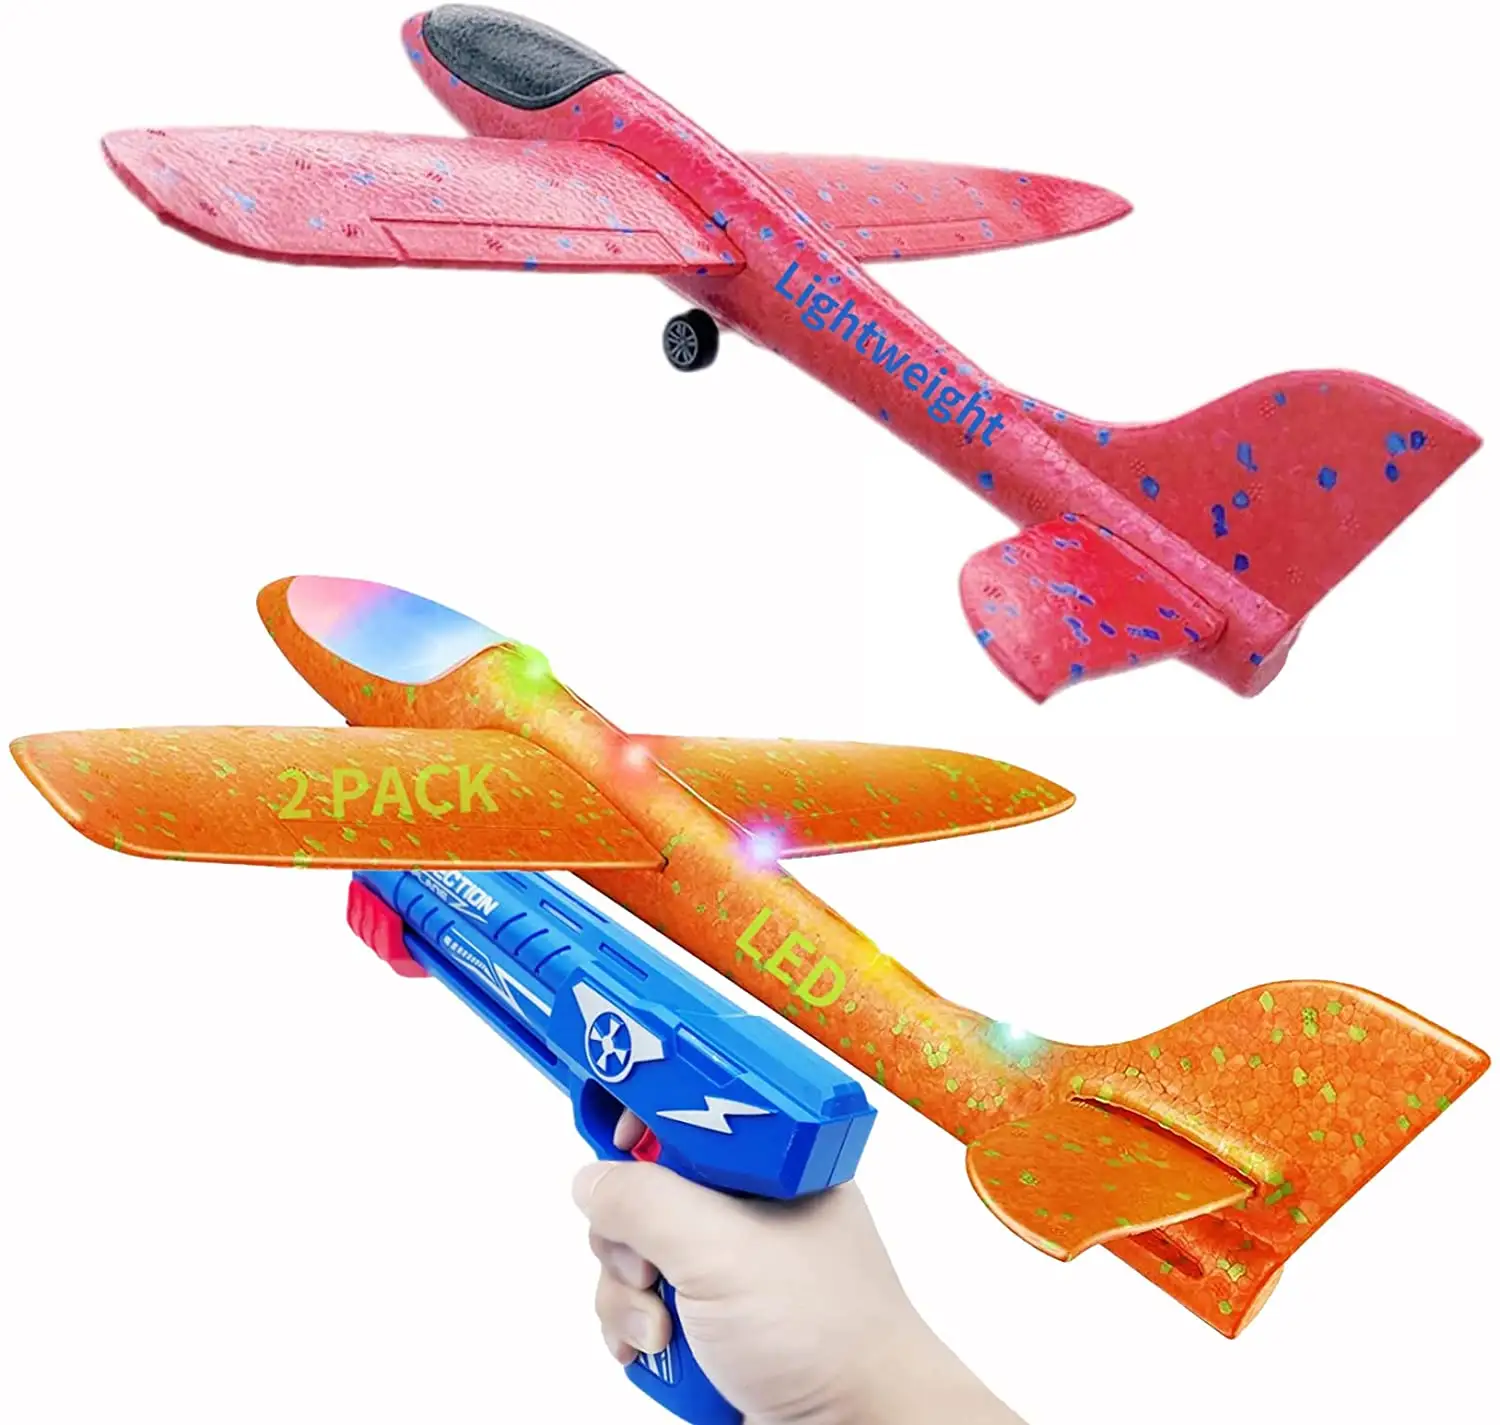 Airplane Launcher Toys Foam Catapult Glider Plane with Launcher Airplane Toy for Birthday Gifts Hand Throw Flying plane